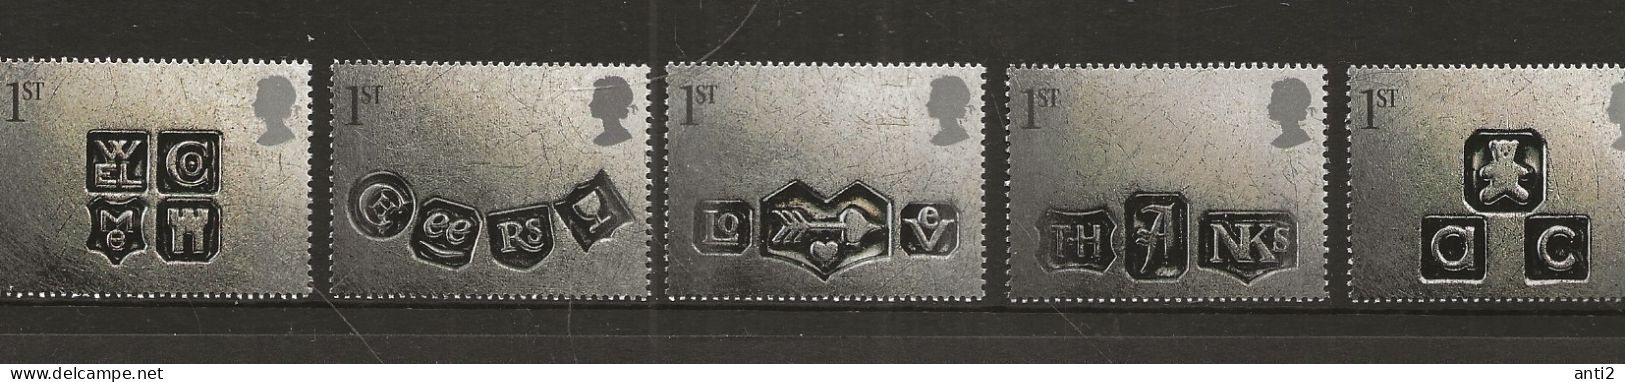 Great Britain  2001 Greeting Stamps,  "Thank You",  "For The Benefit", "Welcome", "ABC", "Love" Mi 1909-1913 MNH(**) - Neufs